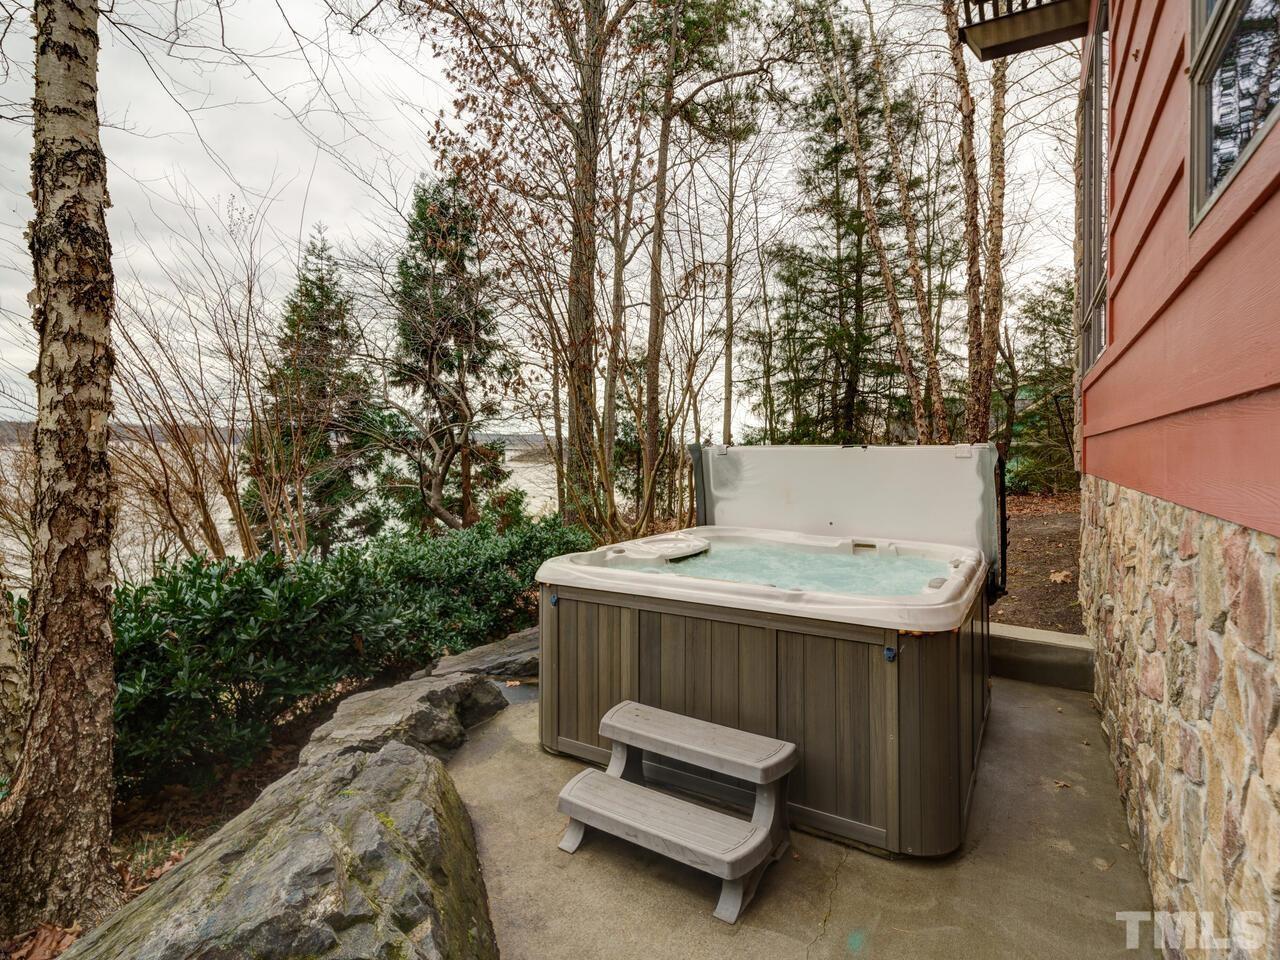 The Hot Tub will convey.  There is also an outdoor Shower.